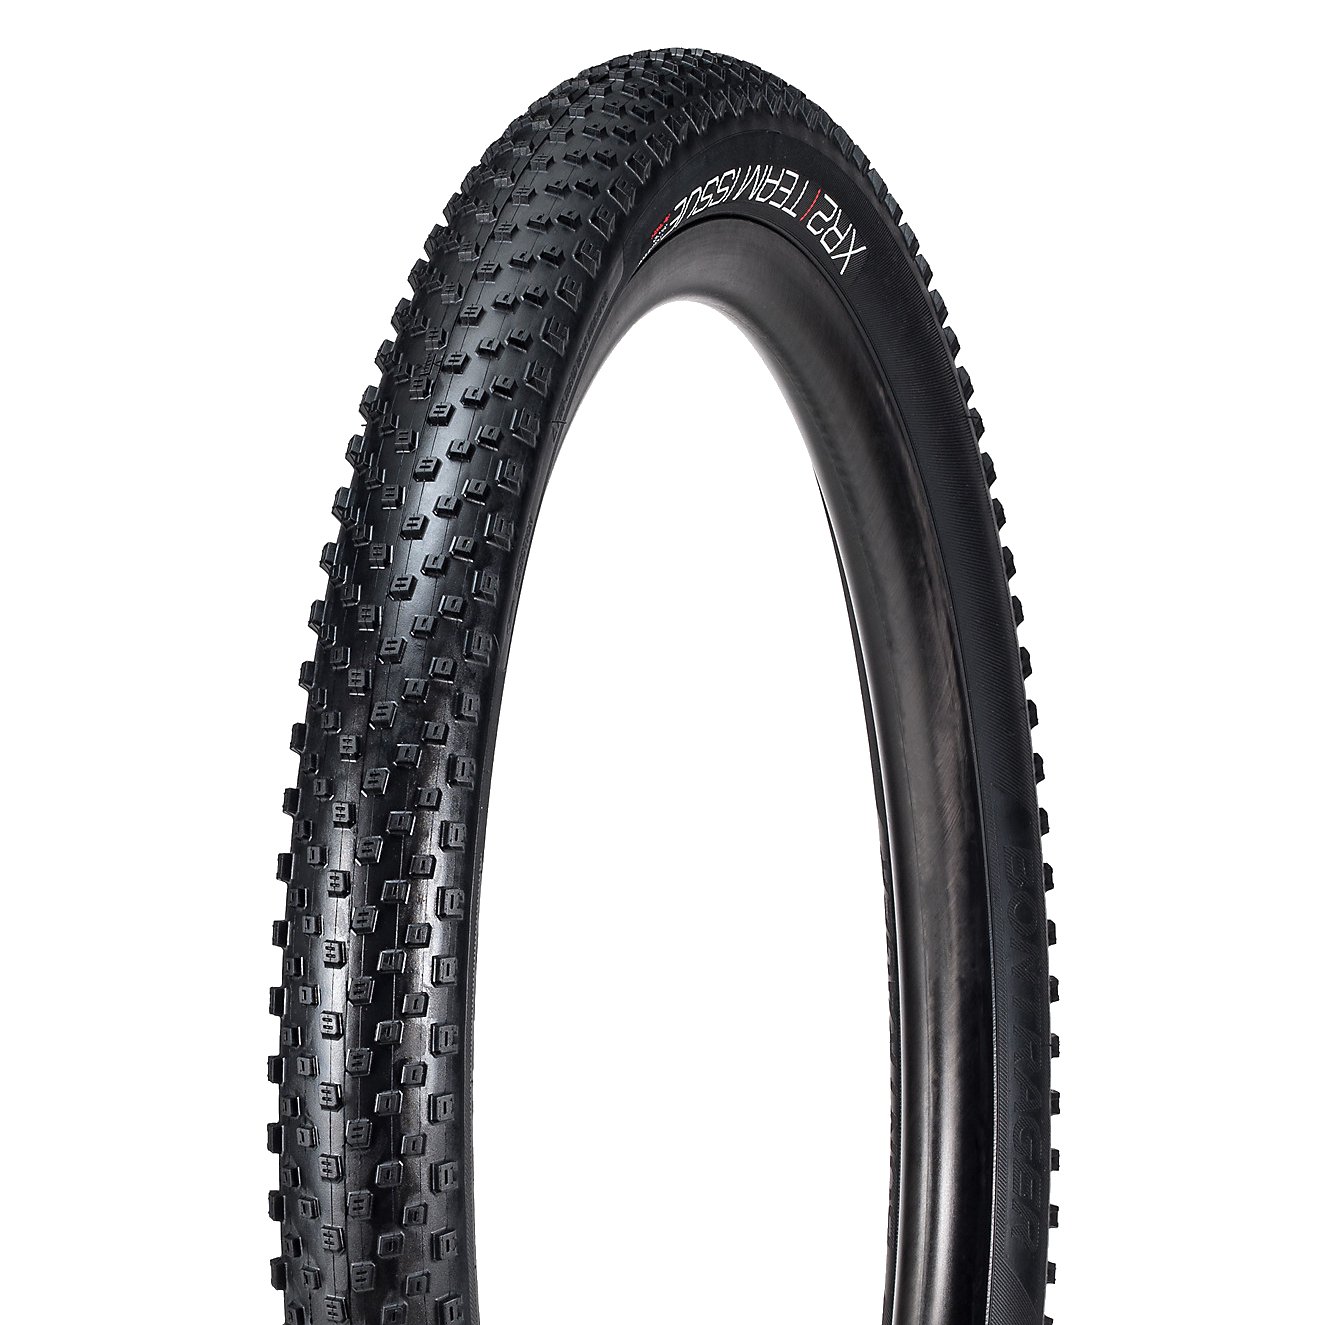 Productfoto van Bontrager XR2 Team Issue TLR Folding Tire - Clincher/Tubeless | Inner Strength - 29x2.60&quot;